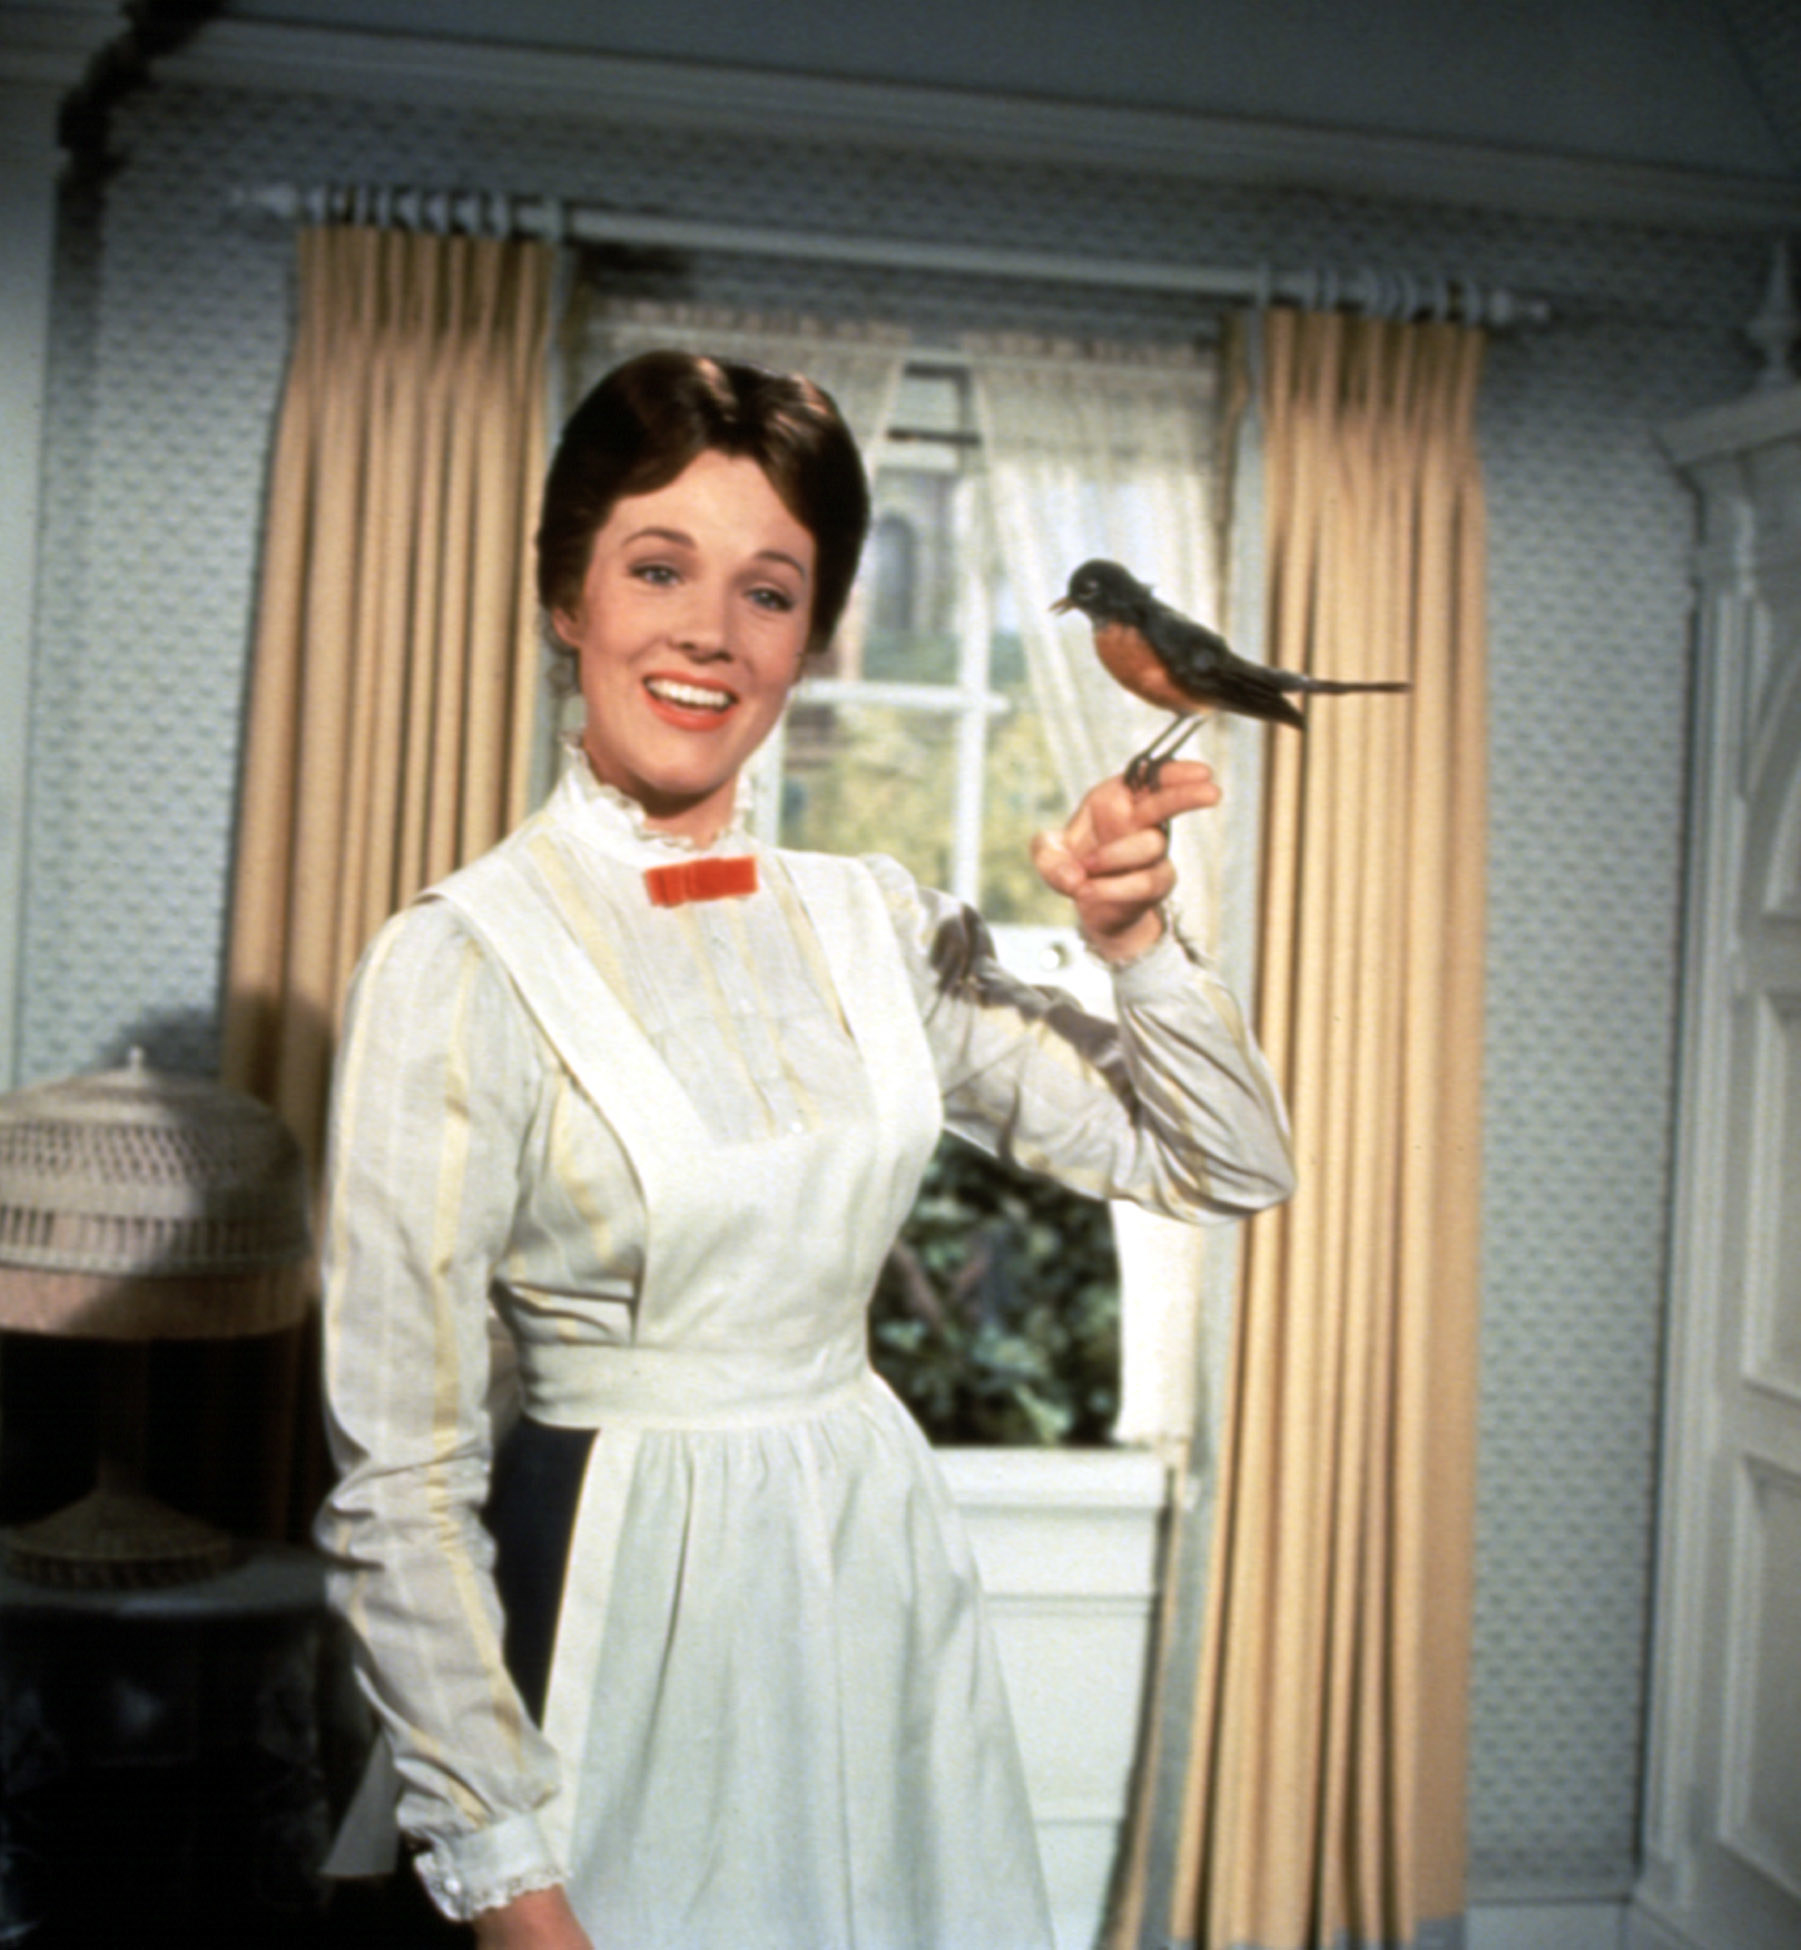 Poppins holding a bird on her finger